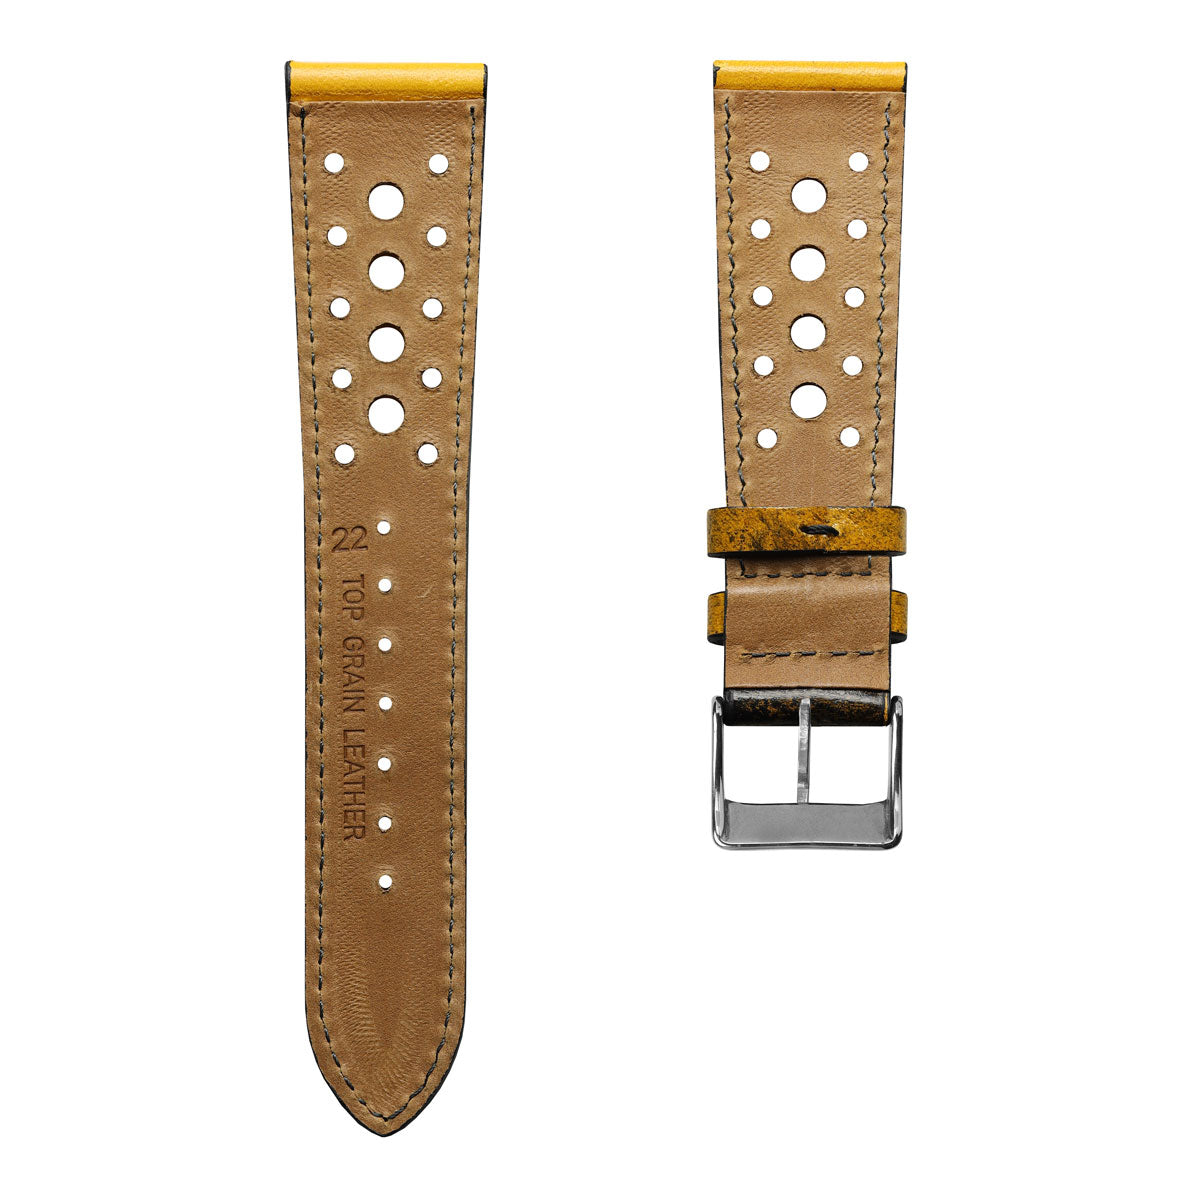 Radstock Racing Style Genuine Leather Watch Strap - Vintage Gold